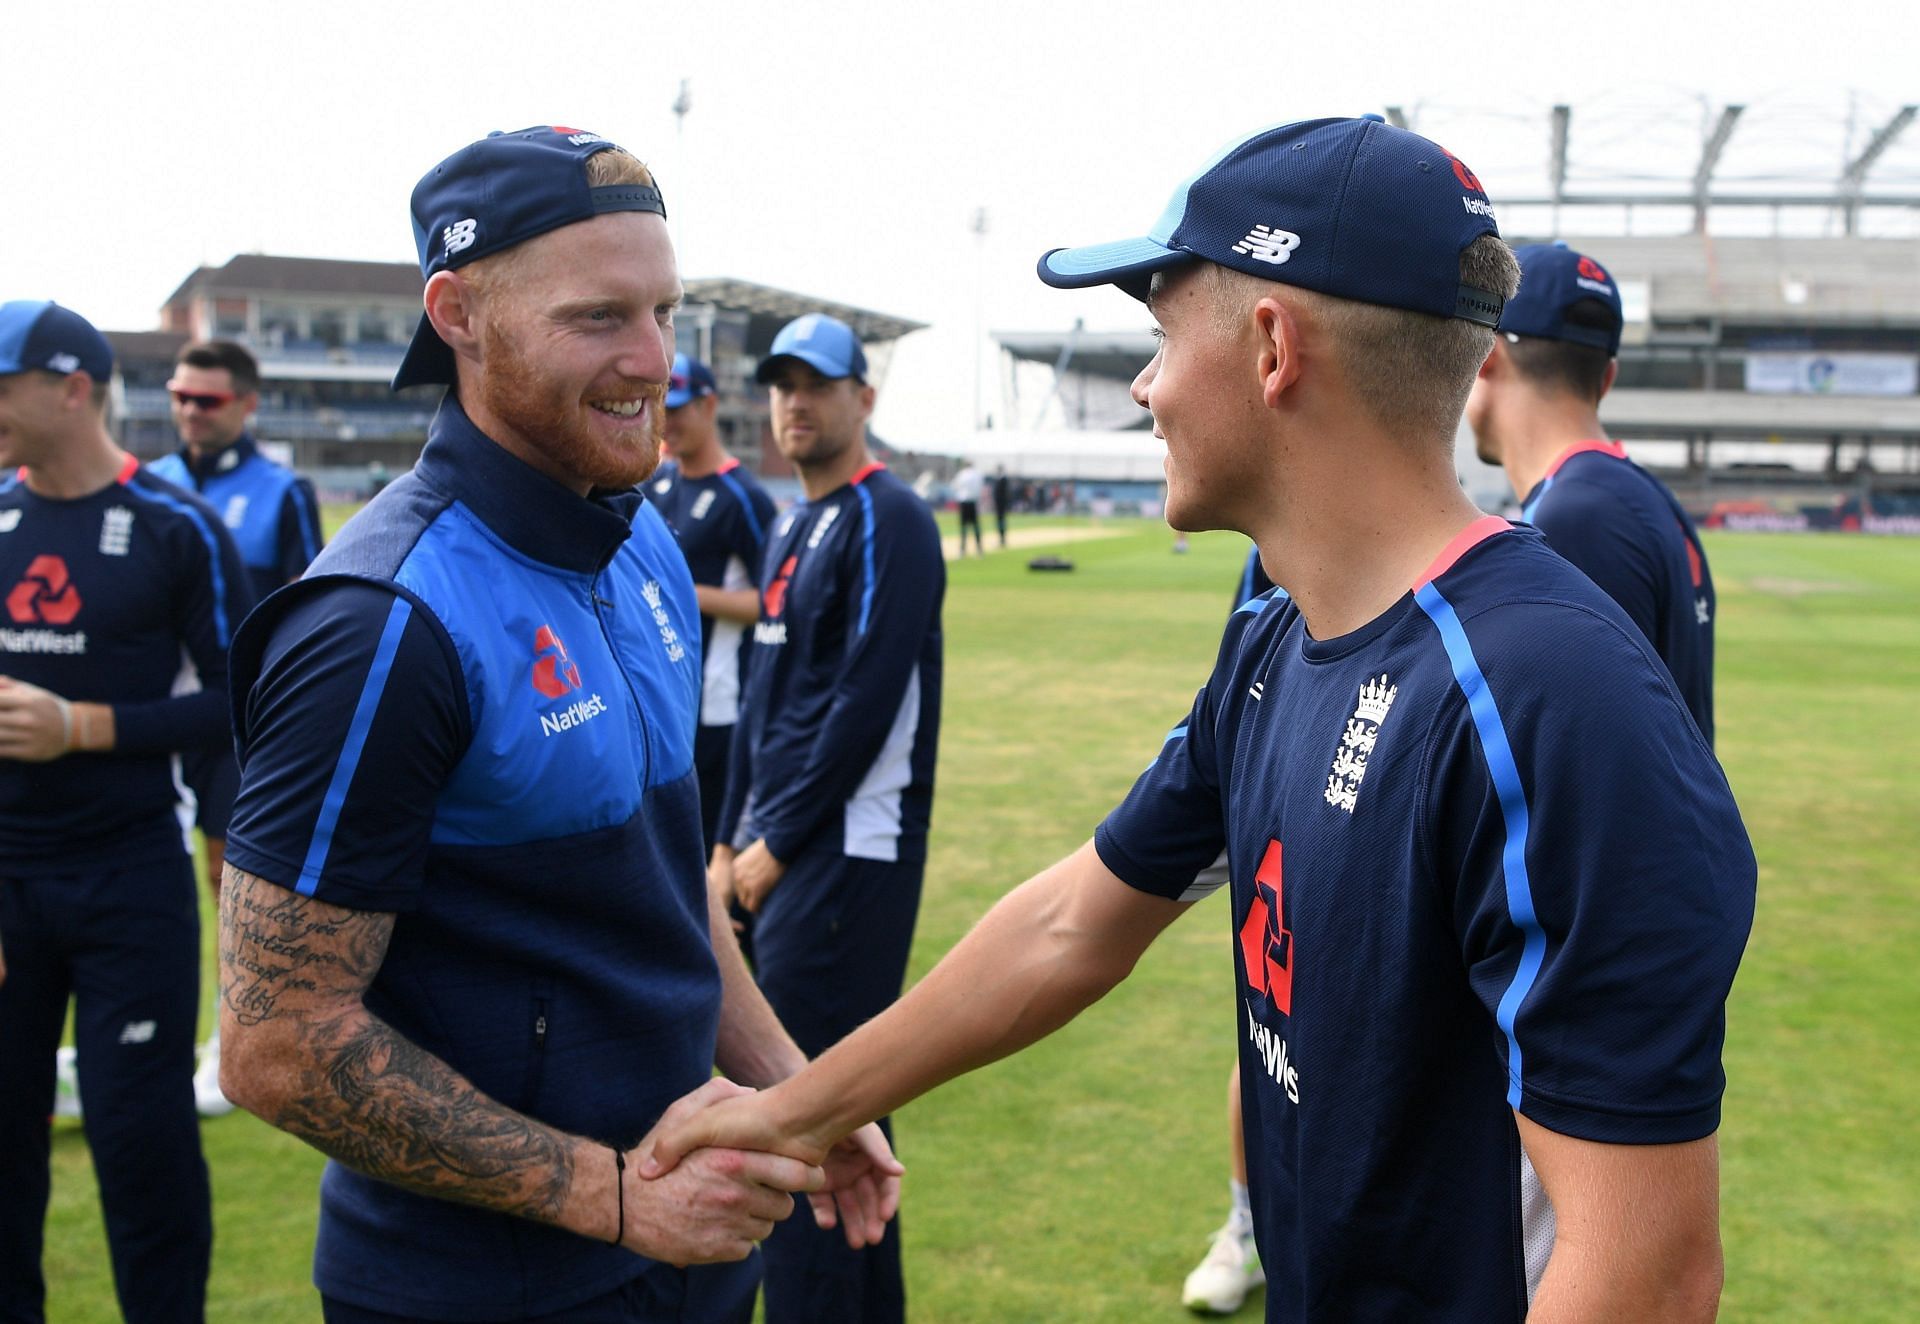 Sam Curran hopes to emulate Ben Stokes. (Image Credits: Getty)